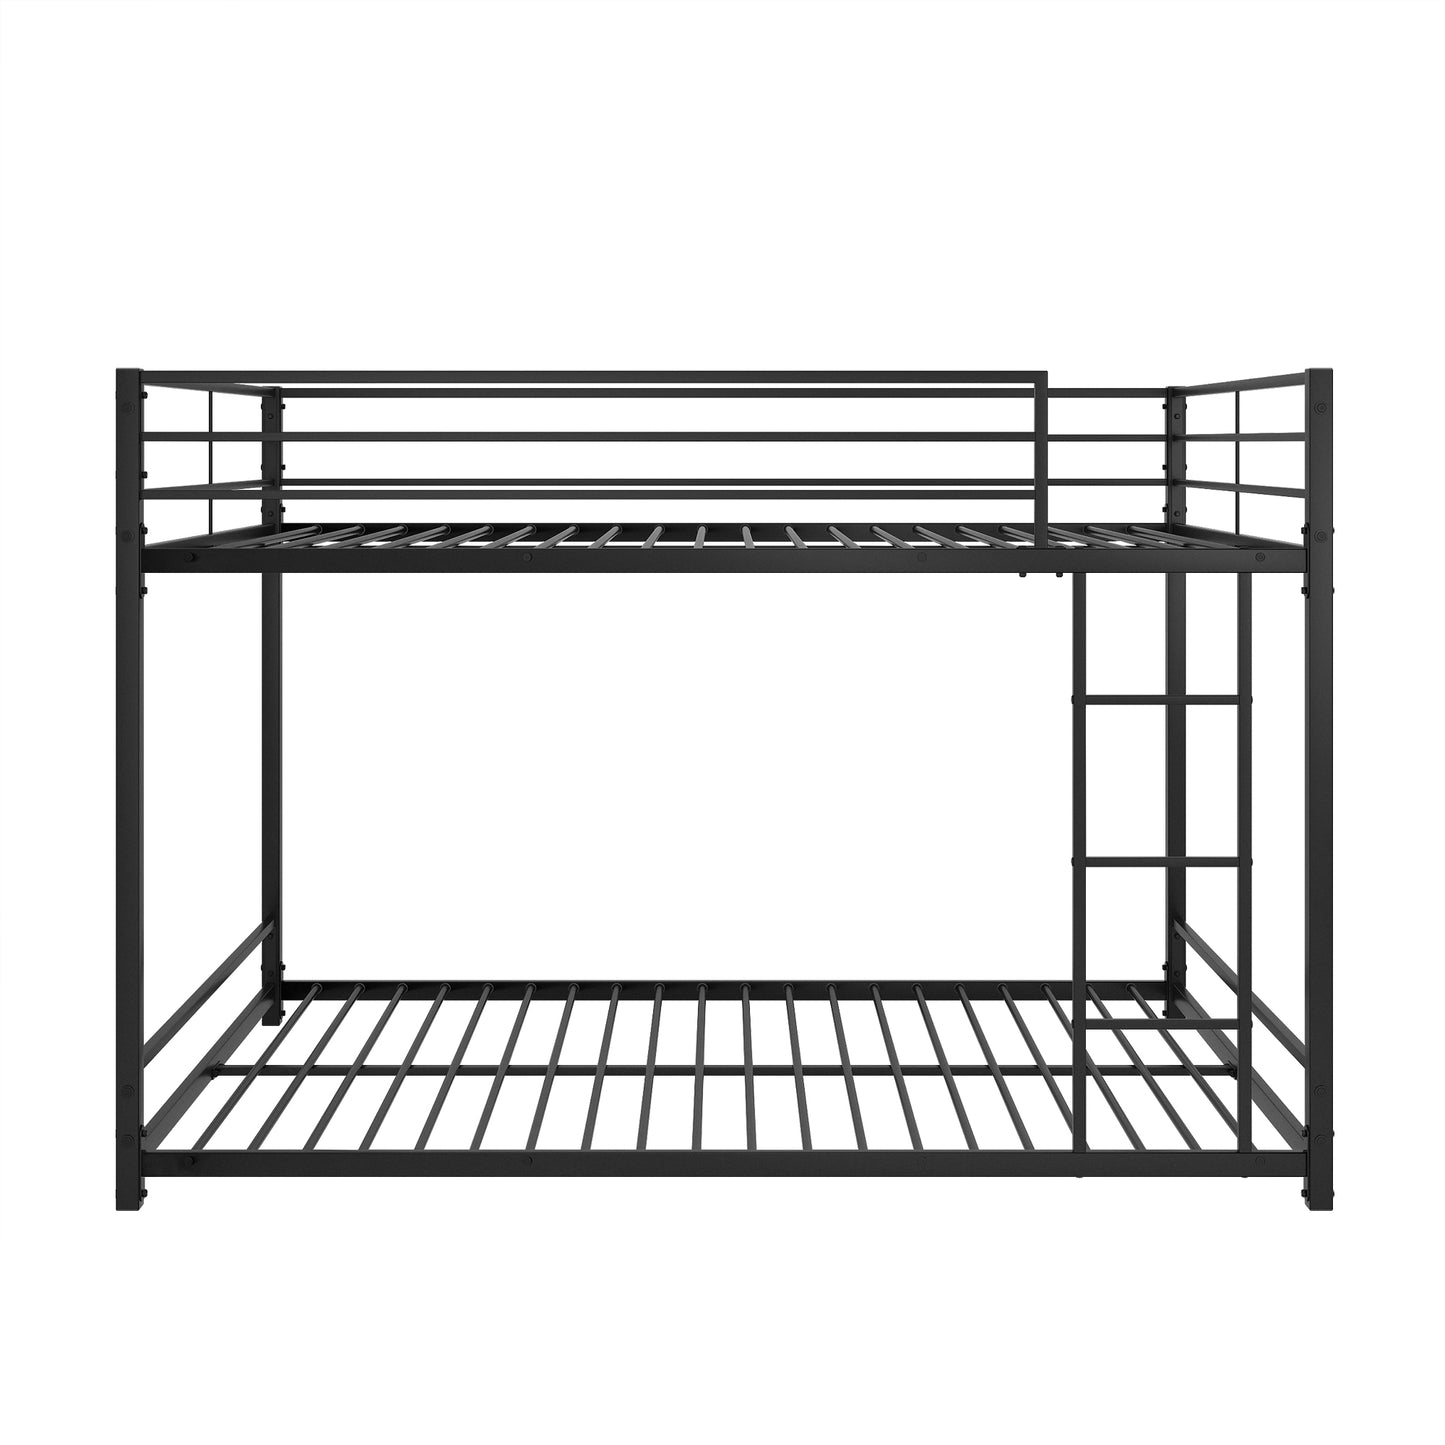 Bunk Bed Full over Full, SYNGAR Space Saver Bunk Bed with Heavy-Duty Metal Frame, Safety Guardrail & Ladder, Full Size Metal Bunk Bed Frame for Kids Boys Girls, No Box Spring Needed, Black, D1961